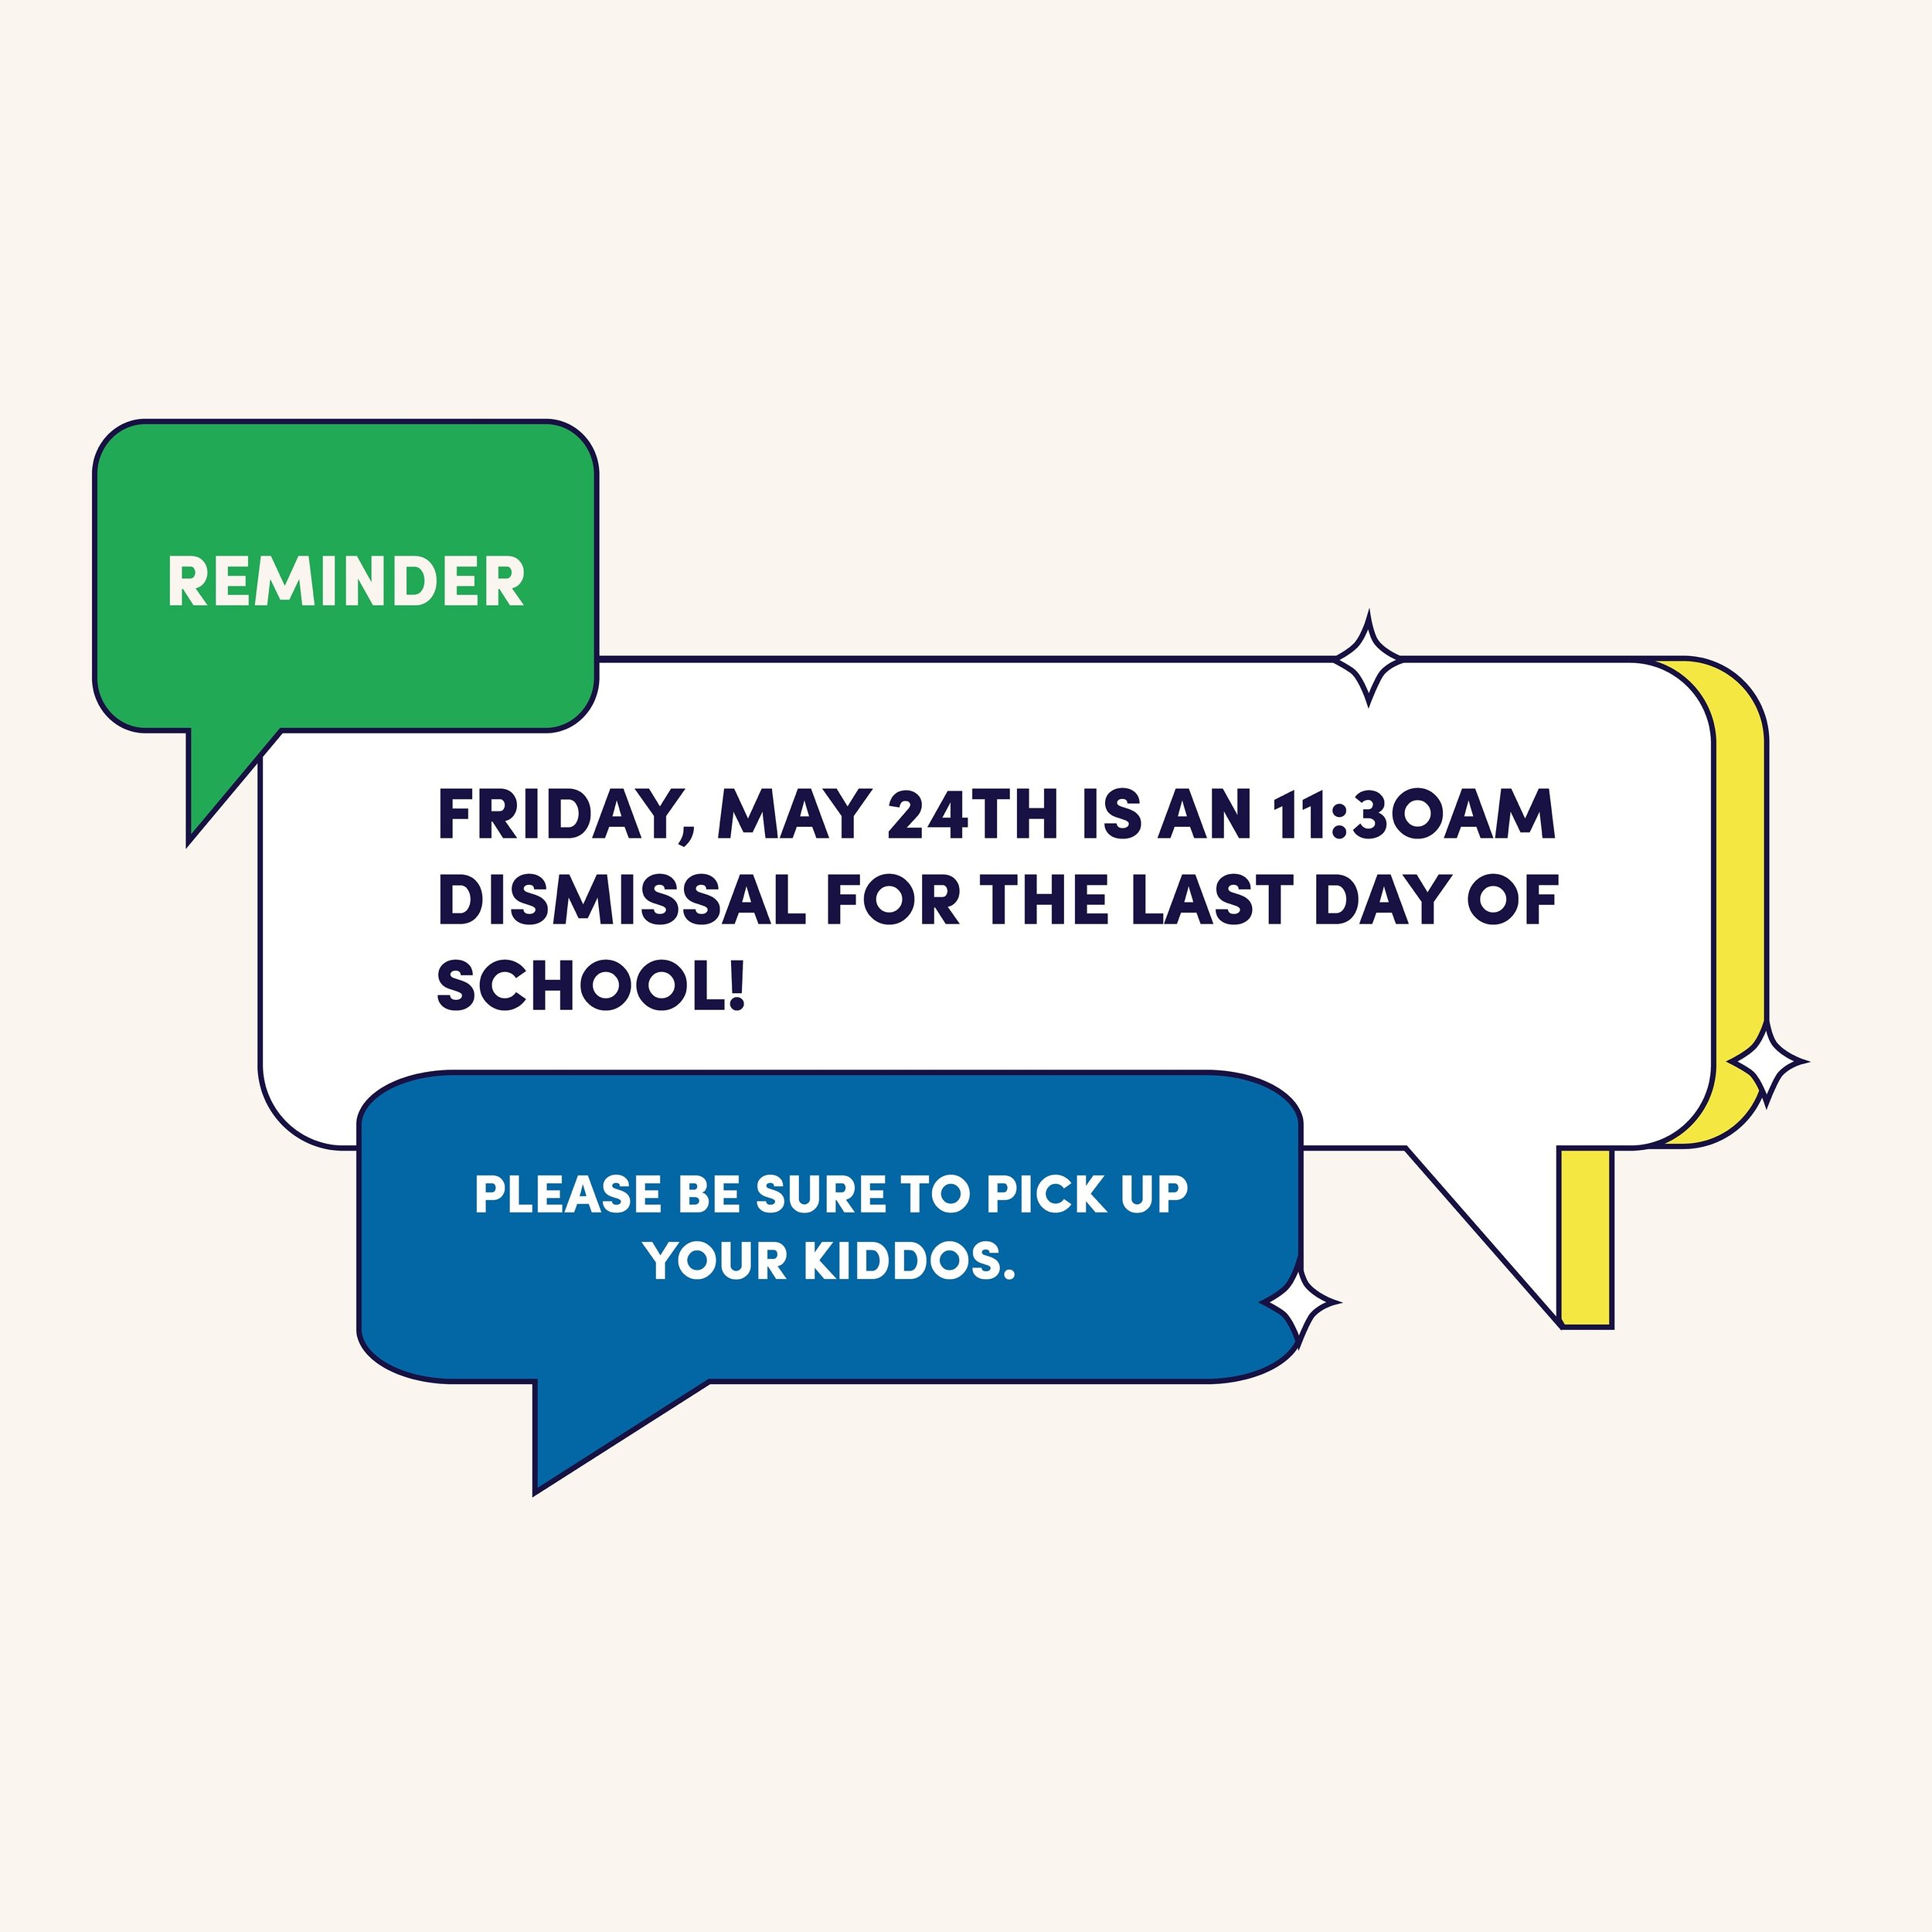 REMINDER Friday, May 24th is an 11:30 AM dismissal for the last day of school. Please be sure to be on time to pick up your kiddos.
_______________

RECORDATORIO: El viernes 24 de mayo ser&aacute; salida temprana a las 11:30 am para el &uacute;ltimo 